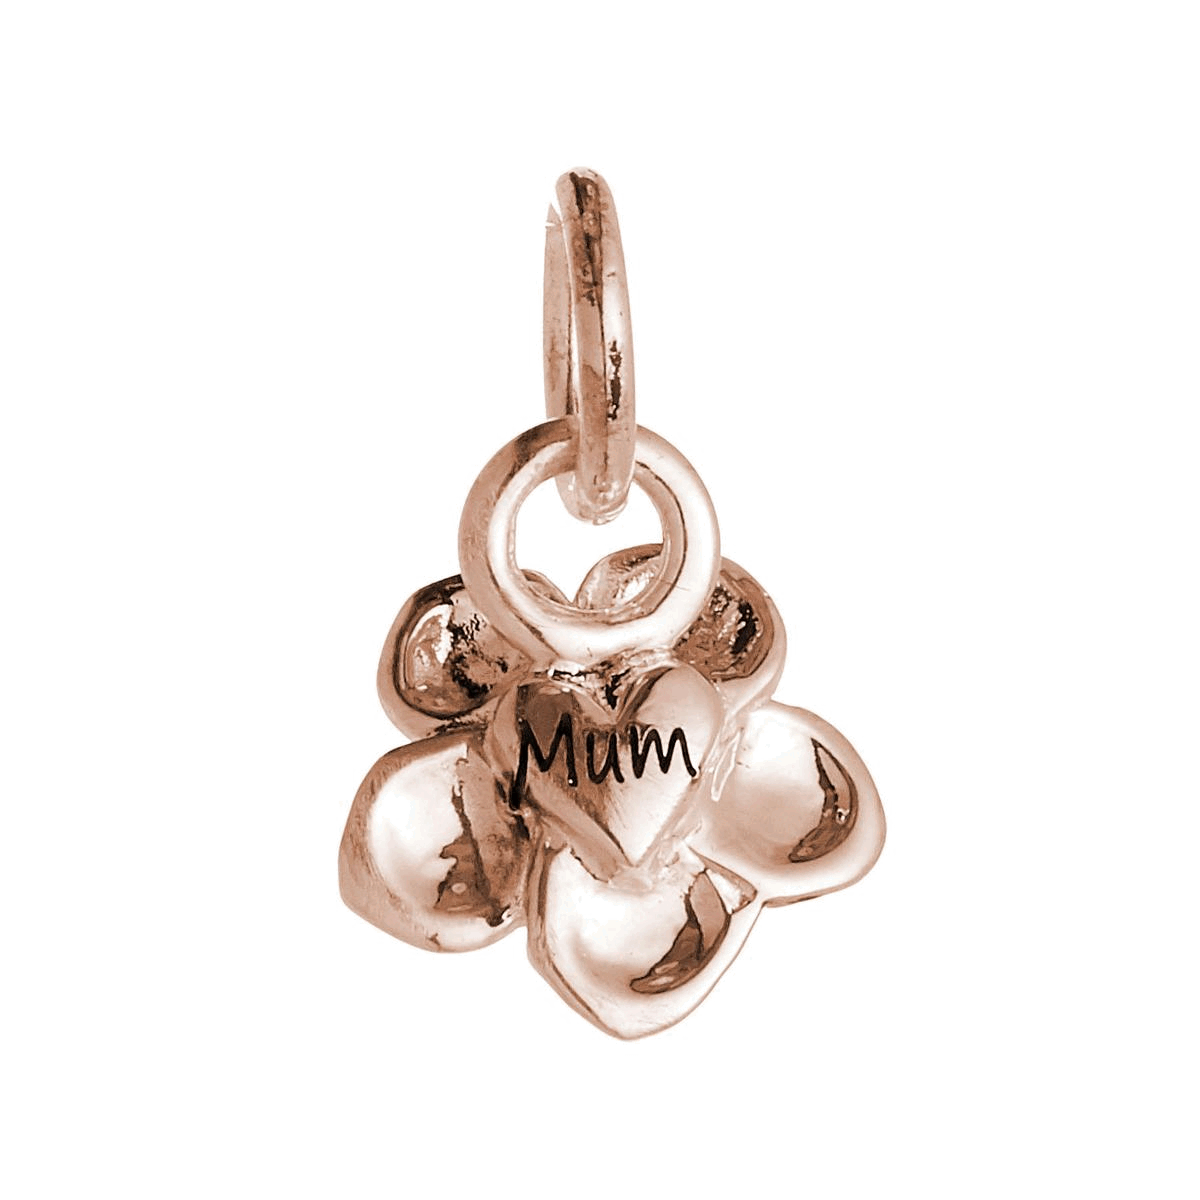 Forget-Me-Not Flower Charm in Solid 9ct Rose Gold